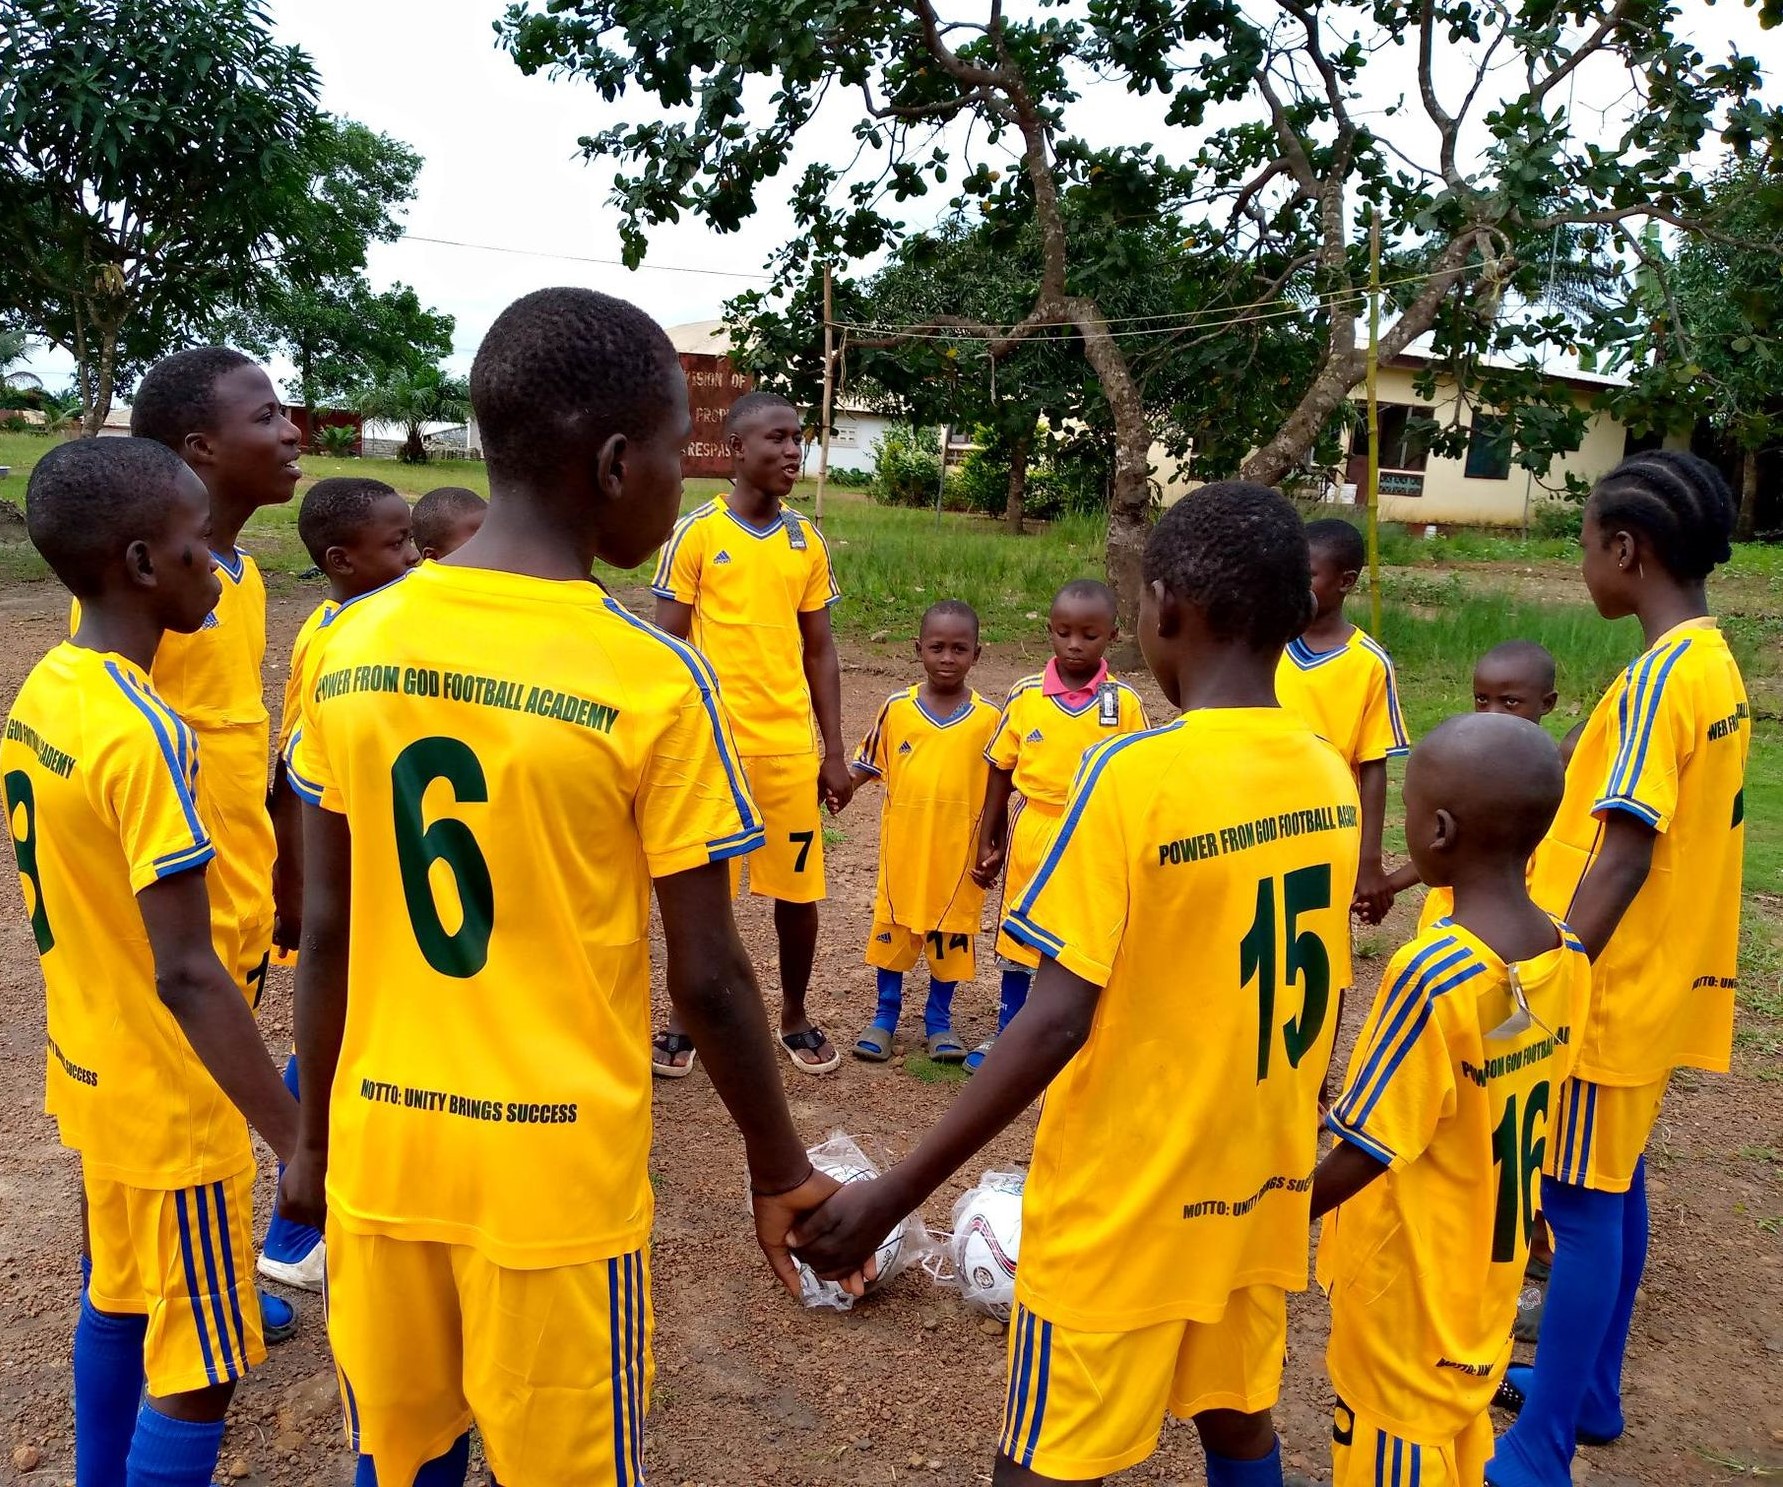 Provision of Hope just bought the team a set of Jerseys for $ 86 US plus 2 soccer balls for $ 20 each.  They were so thrilled!! They never had team shirts before.